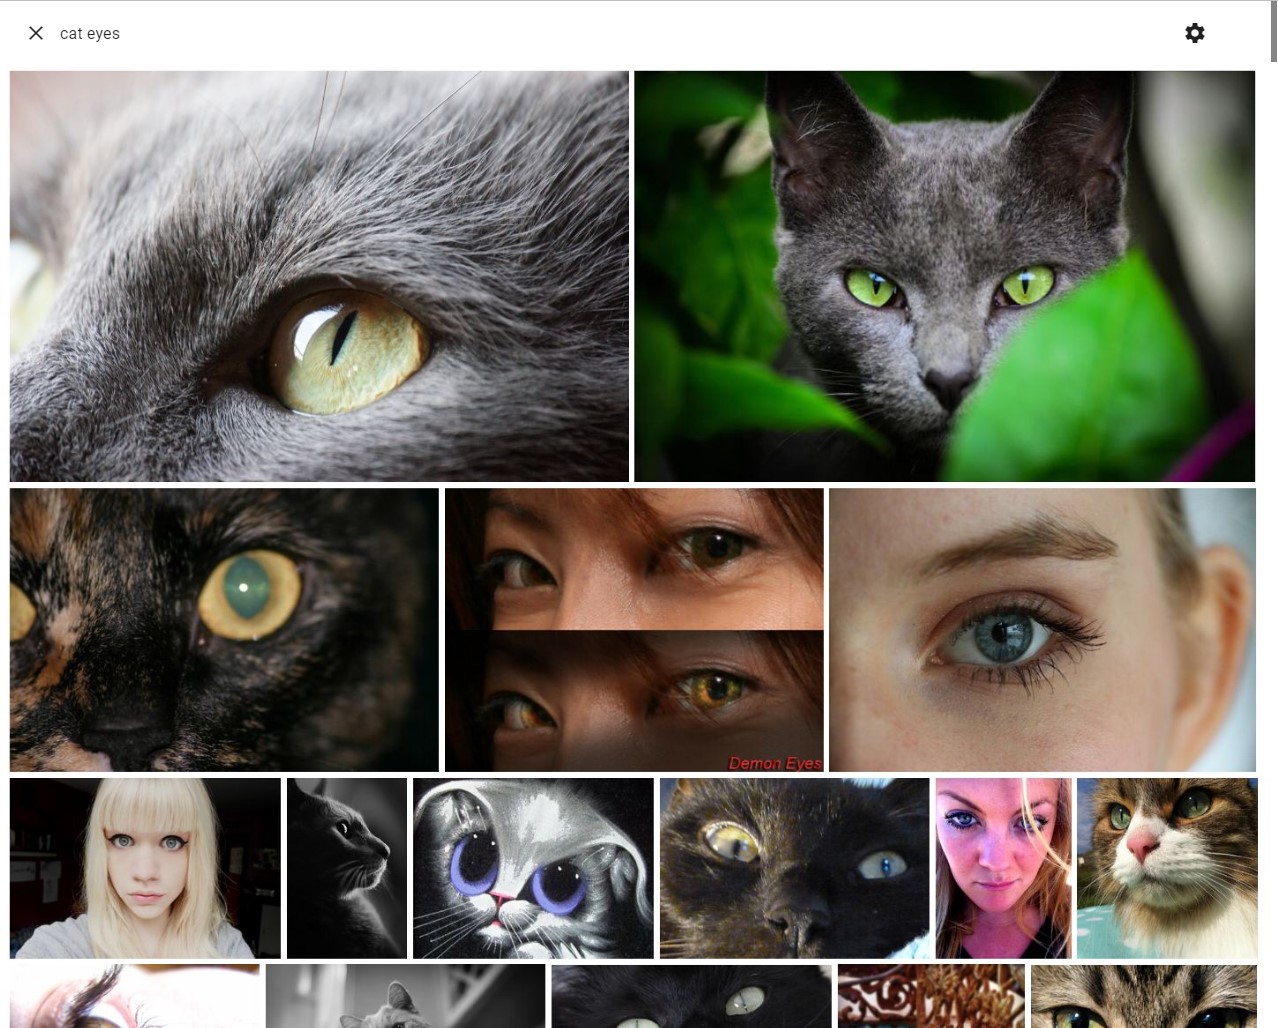 semantic search for "cat eyes"